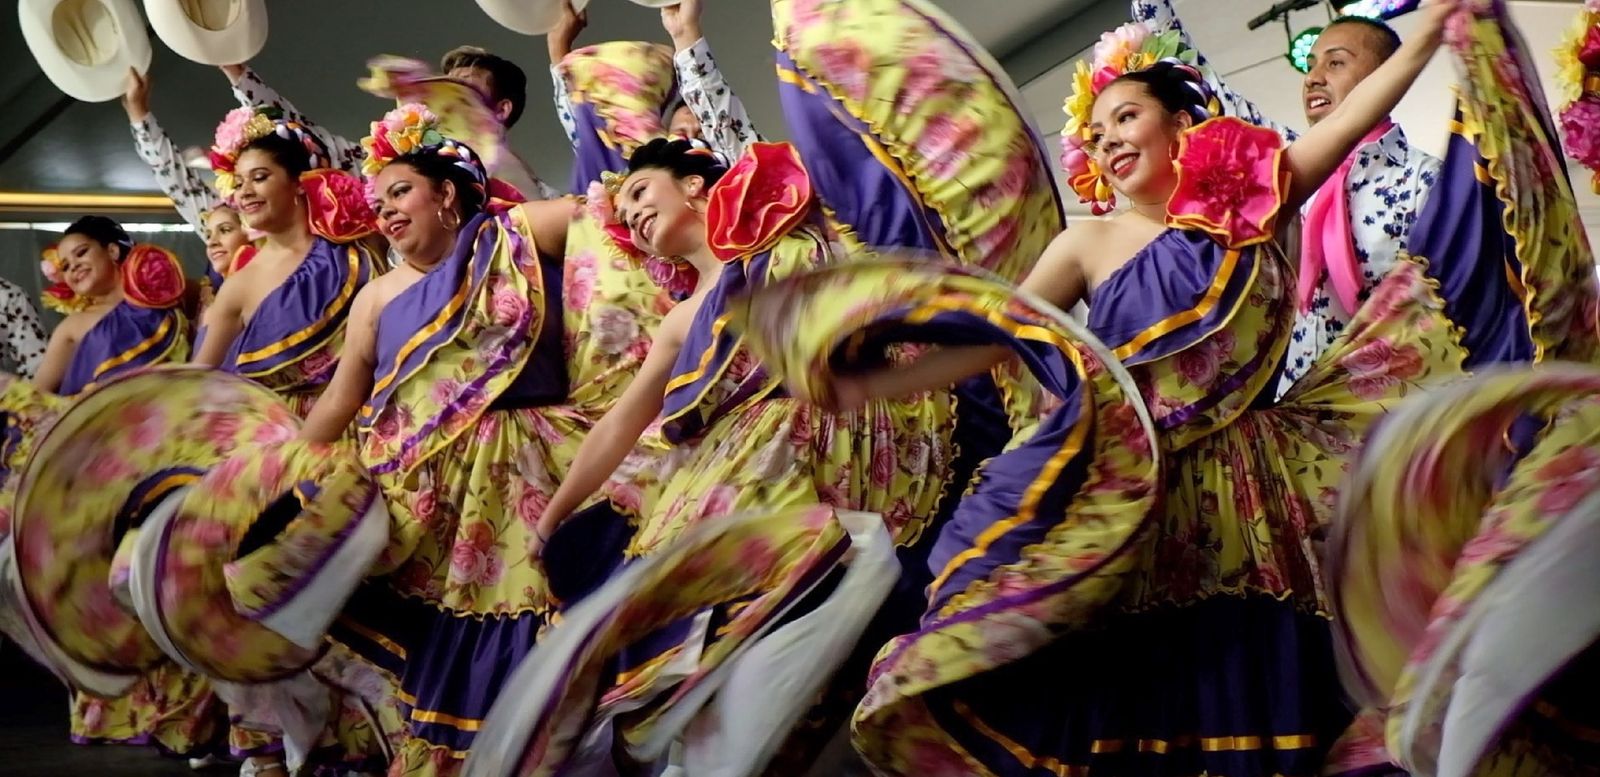 Want to celebrate Cinco de Mayo? Check out these local events